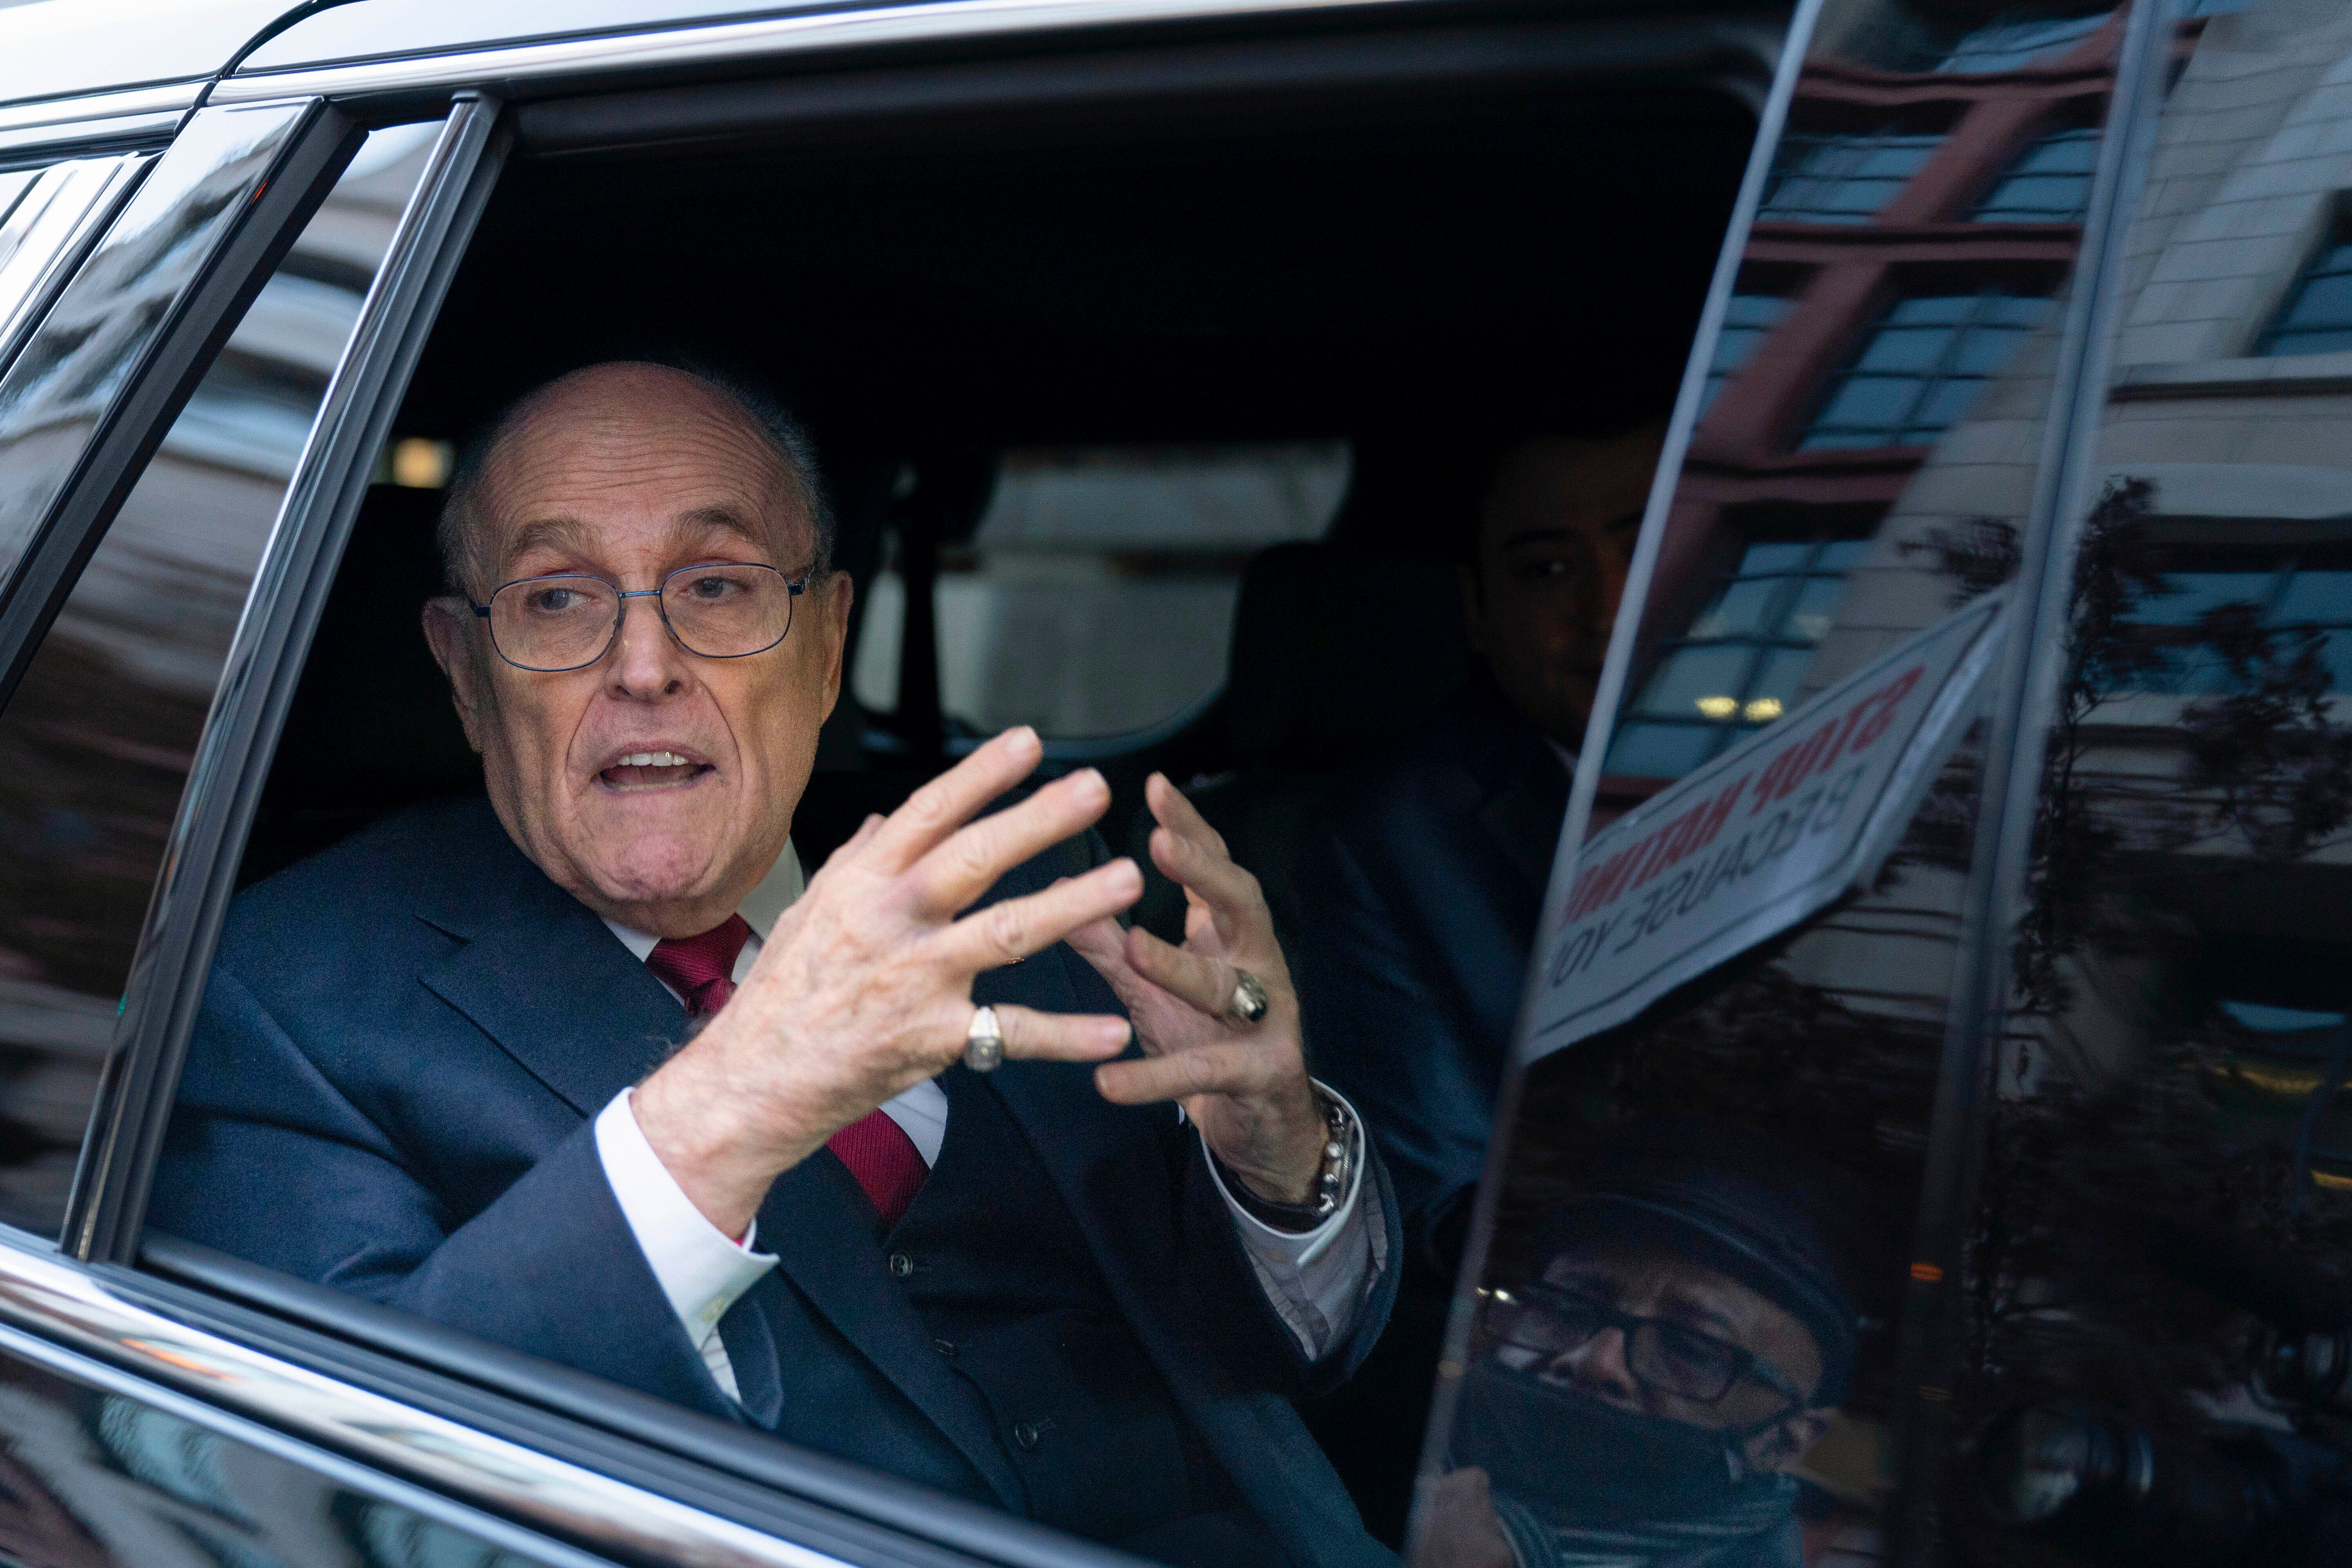 Rudy Giuliani leaves his defamation trial on Friday